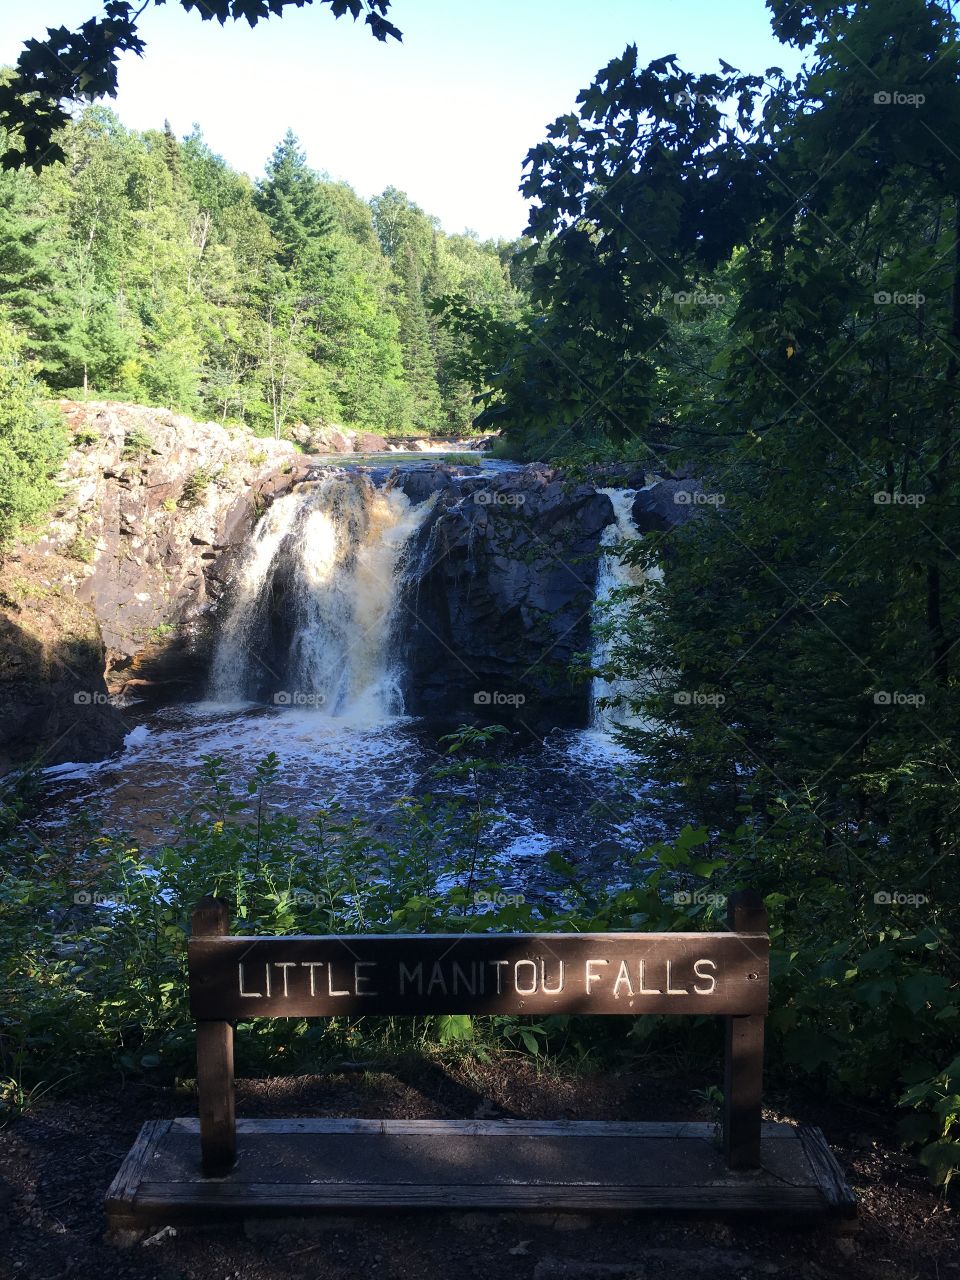 The Little Manitou Falls in the Pattison State Park in Wisconsin